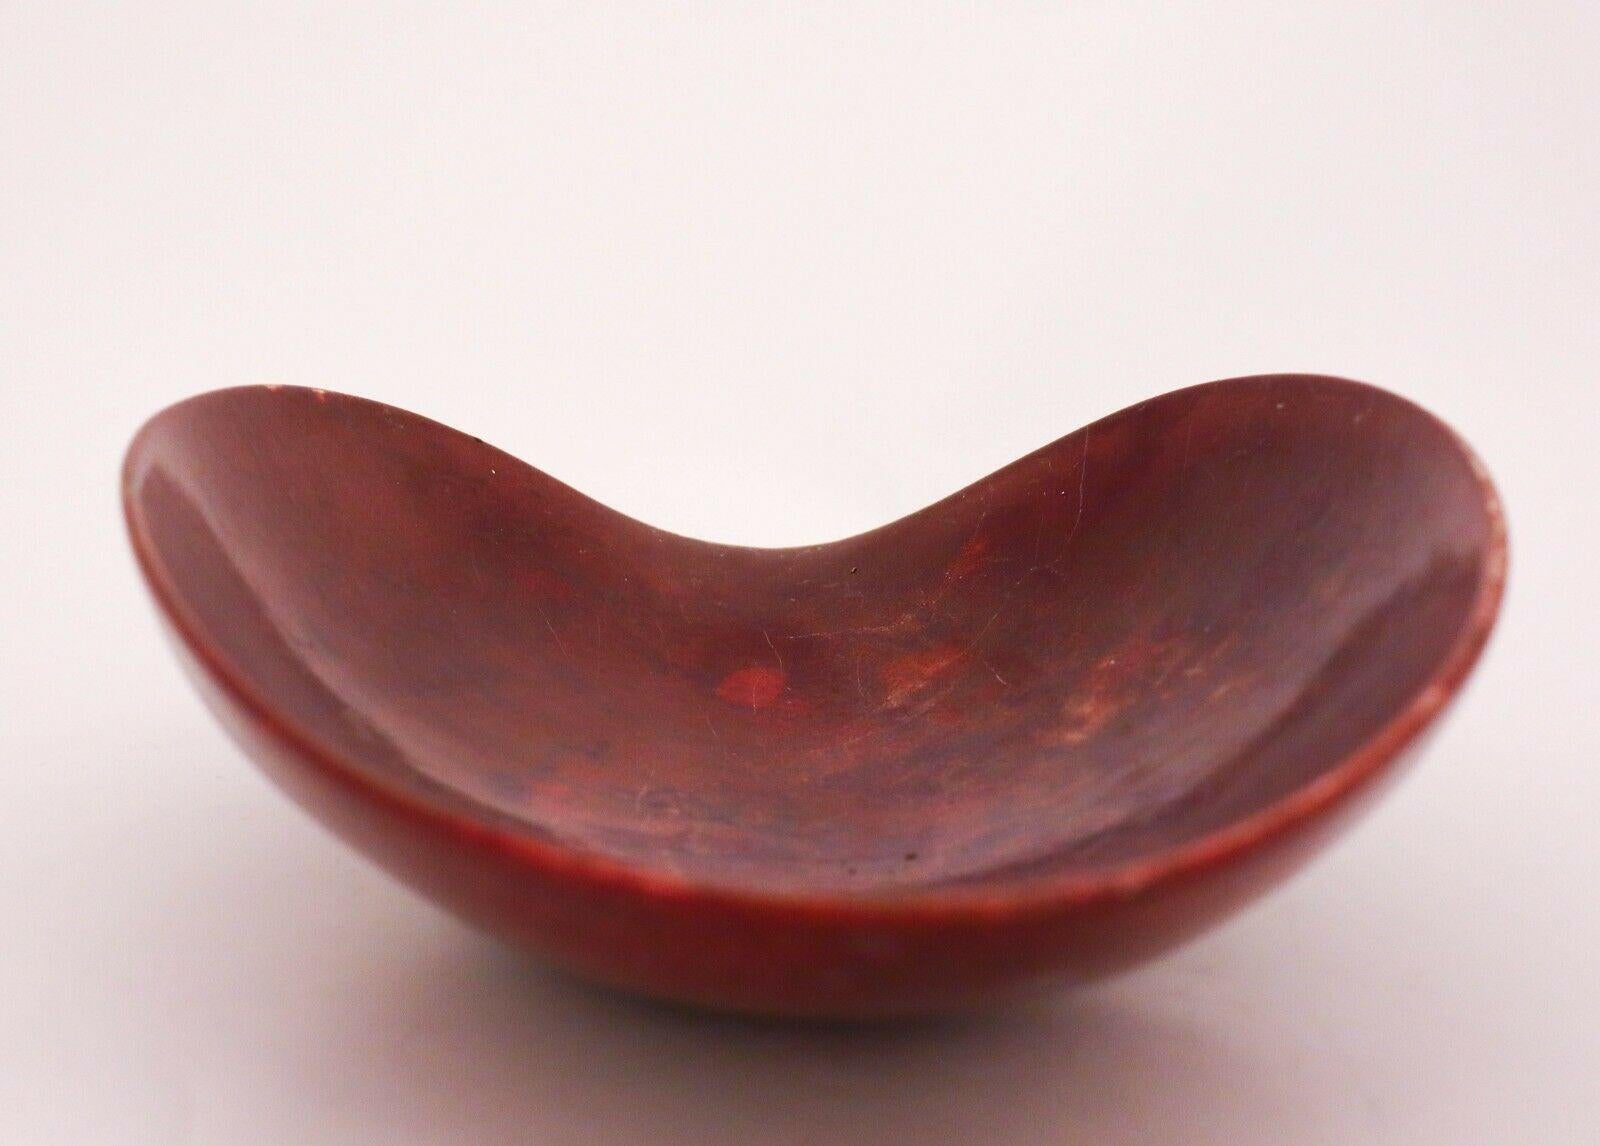 A beautiful red bowl designed by Hans Hedberg in his studio in Biot. The bowl is 33,5 x 23,5 cm in diameter and in very good condition except from scratches and marks. 

Hedberg worked with several famous artists, among Picasso, Léger and